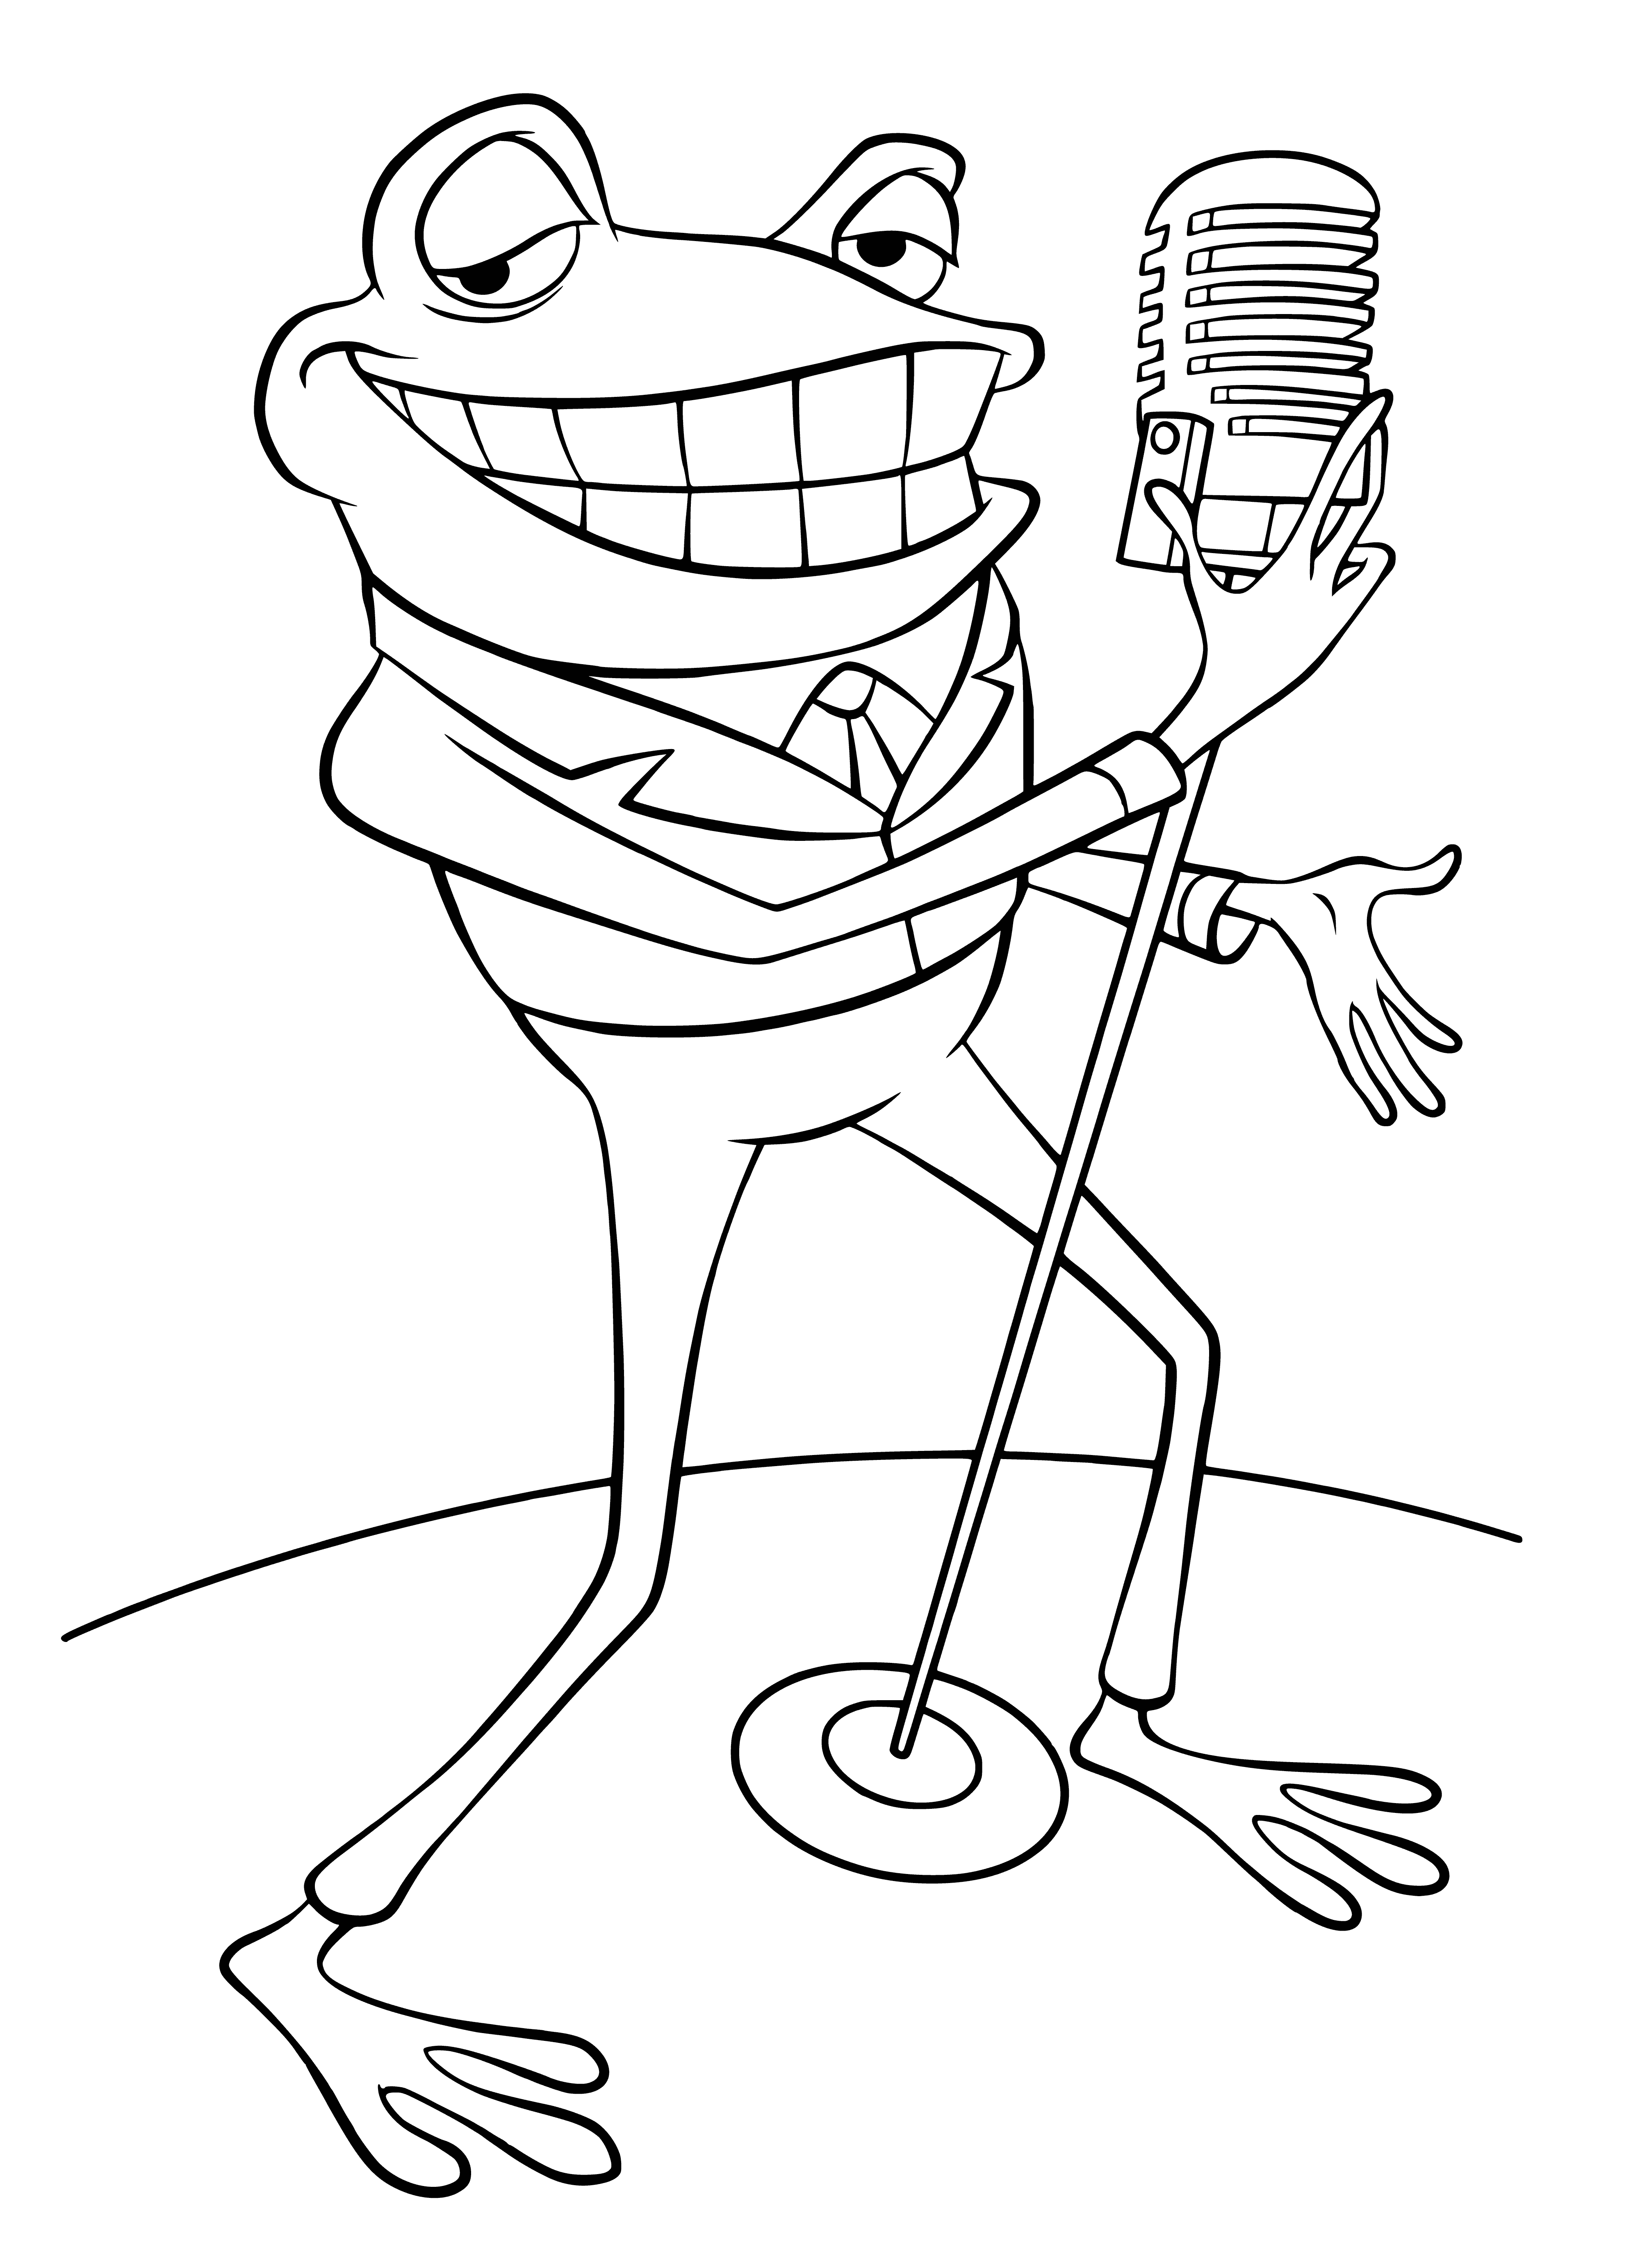 Singing frog coloring page